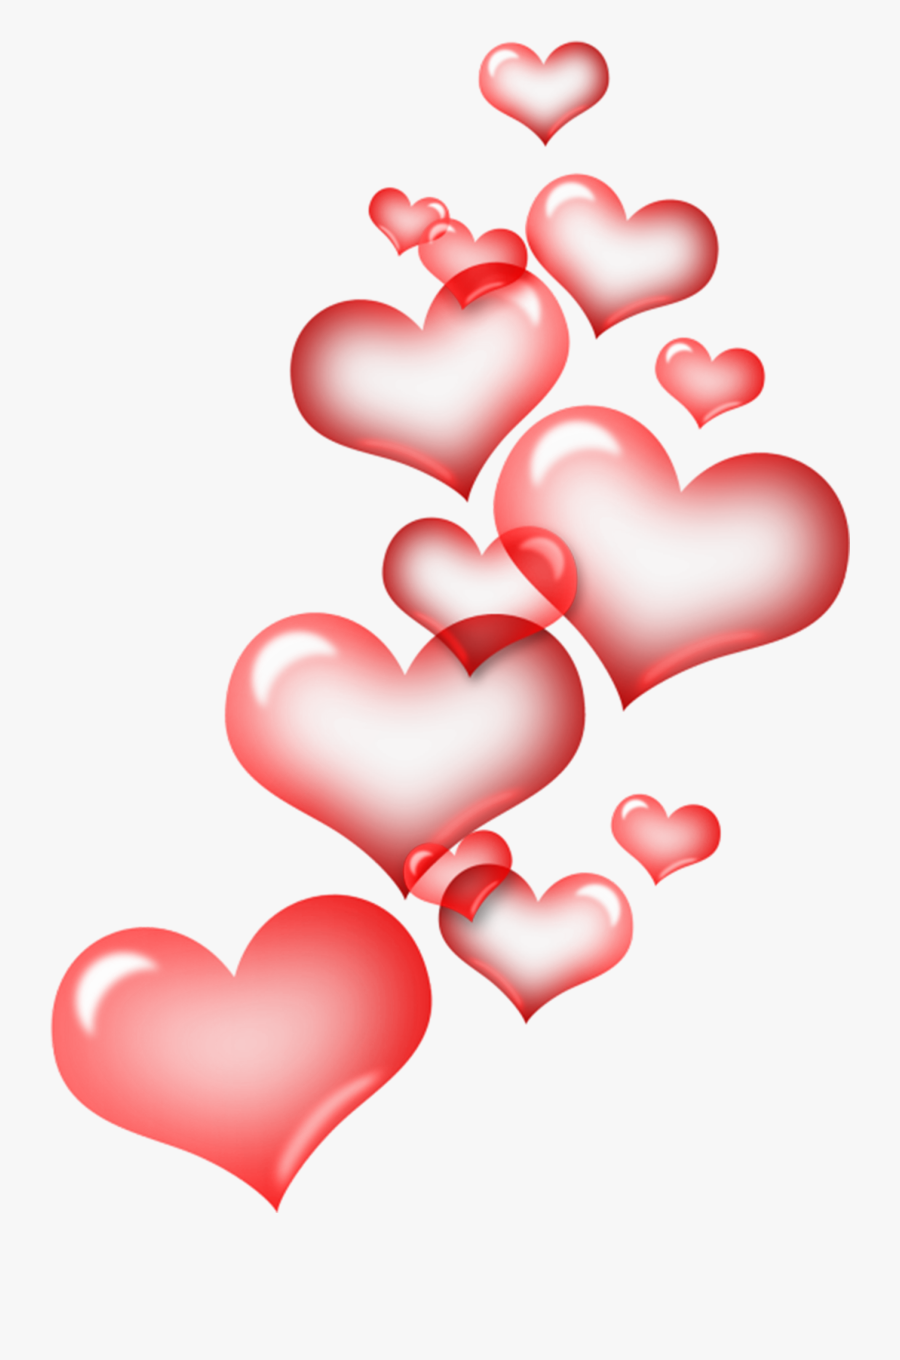 Floating Pink Hearts Images Png - Love Images Png Hd, Transparent Clipart